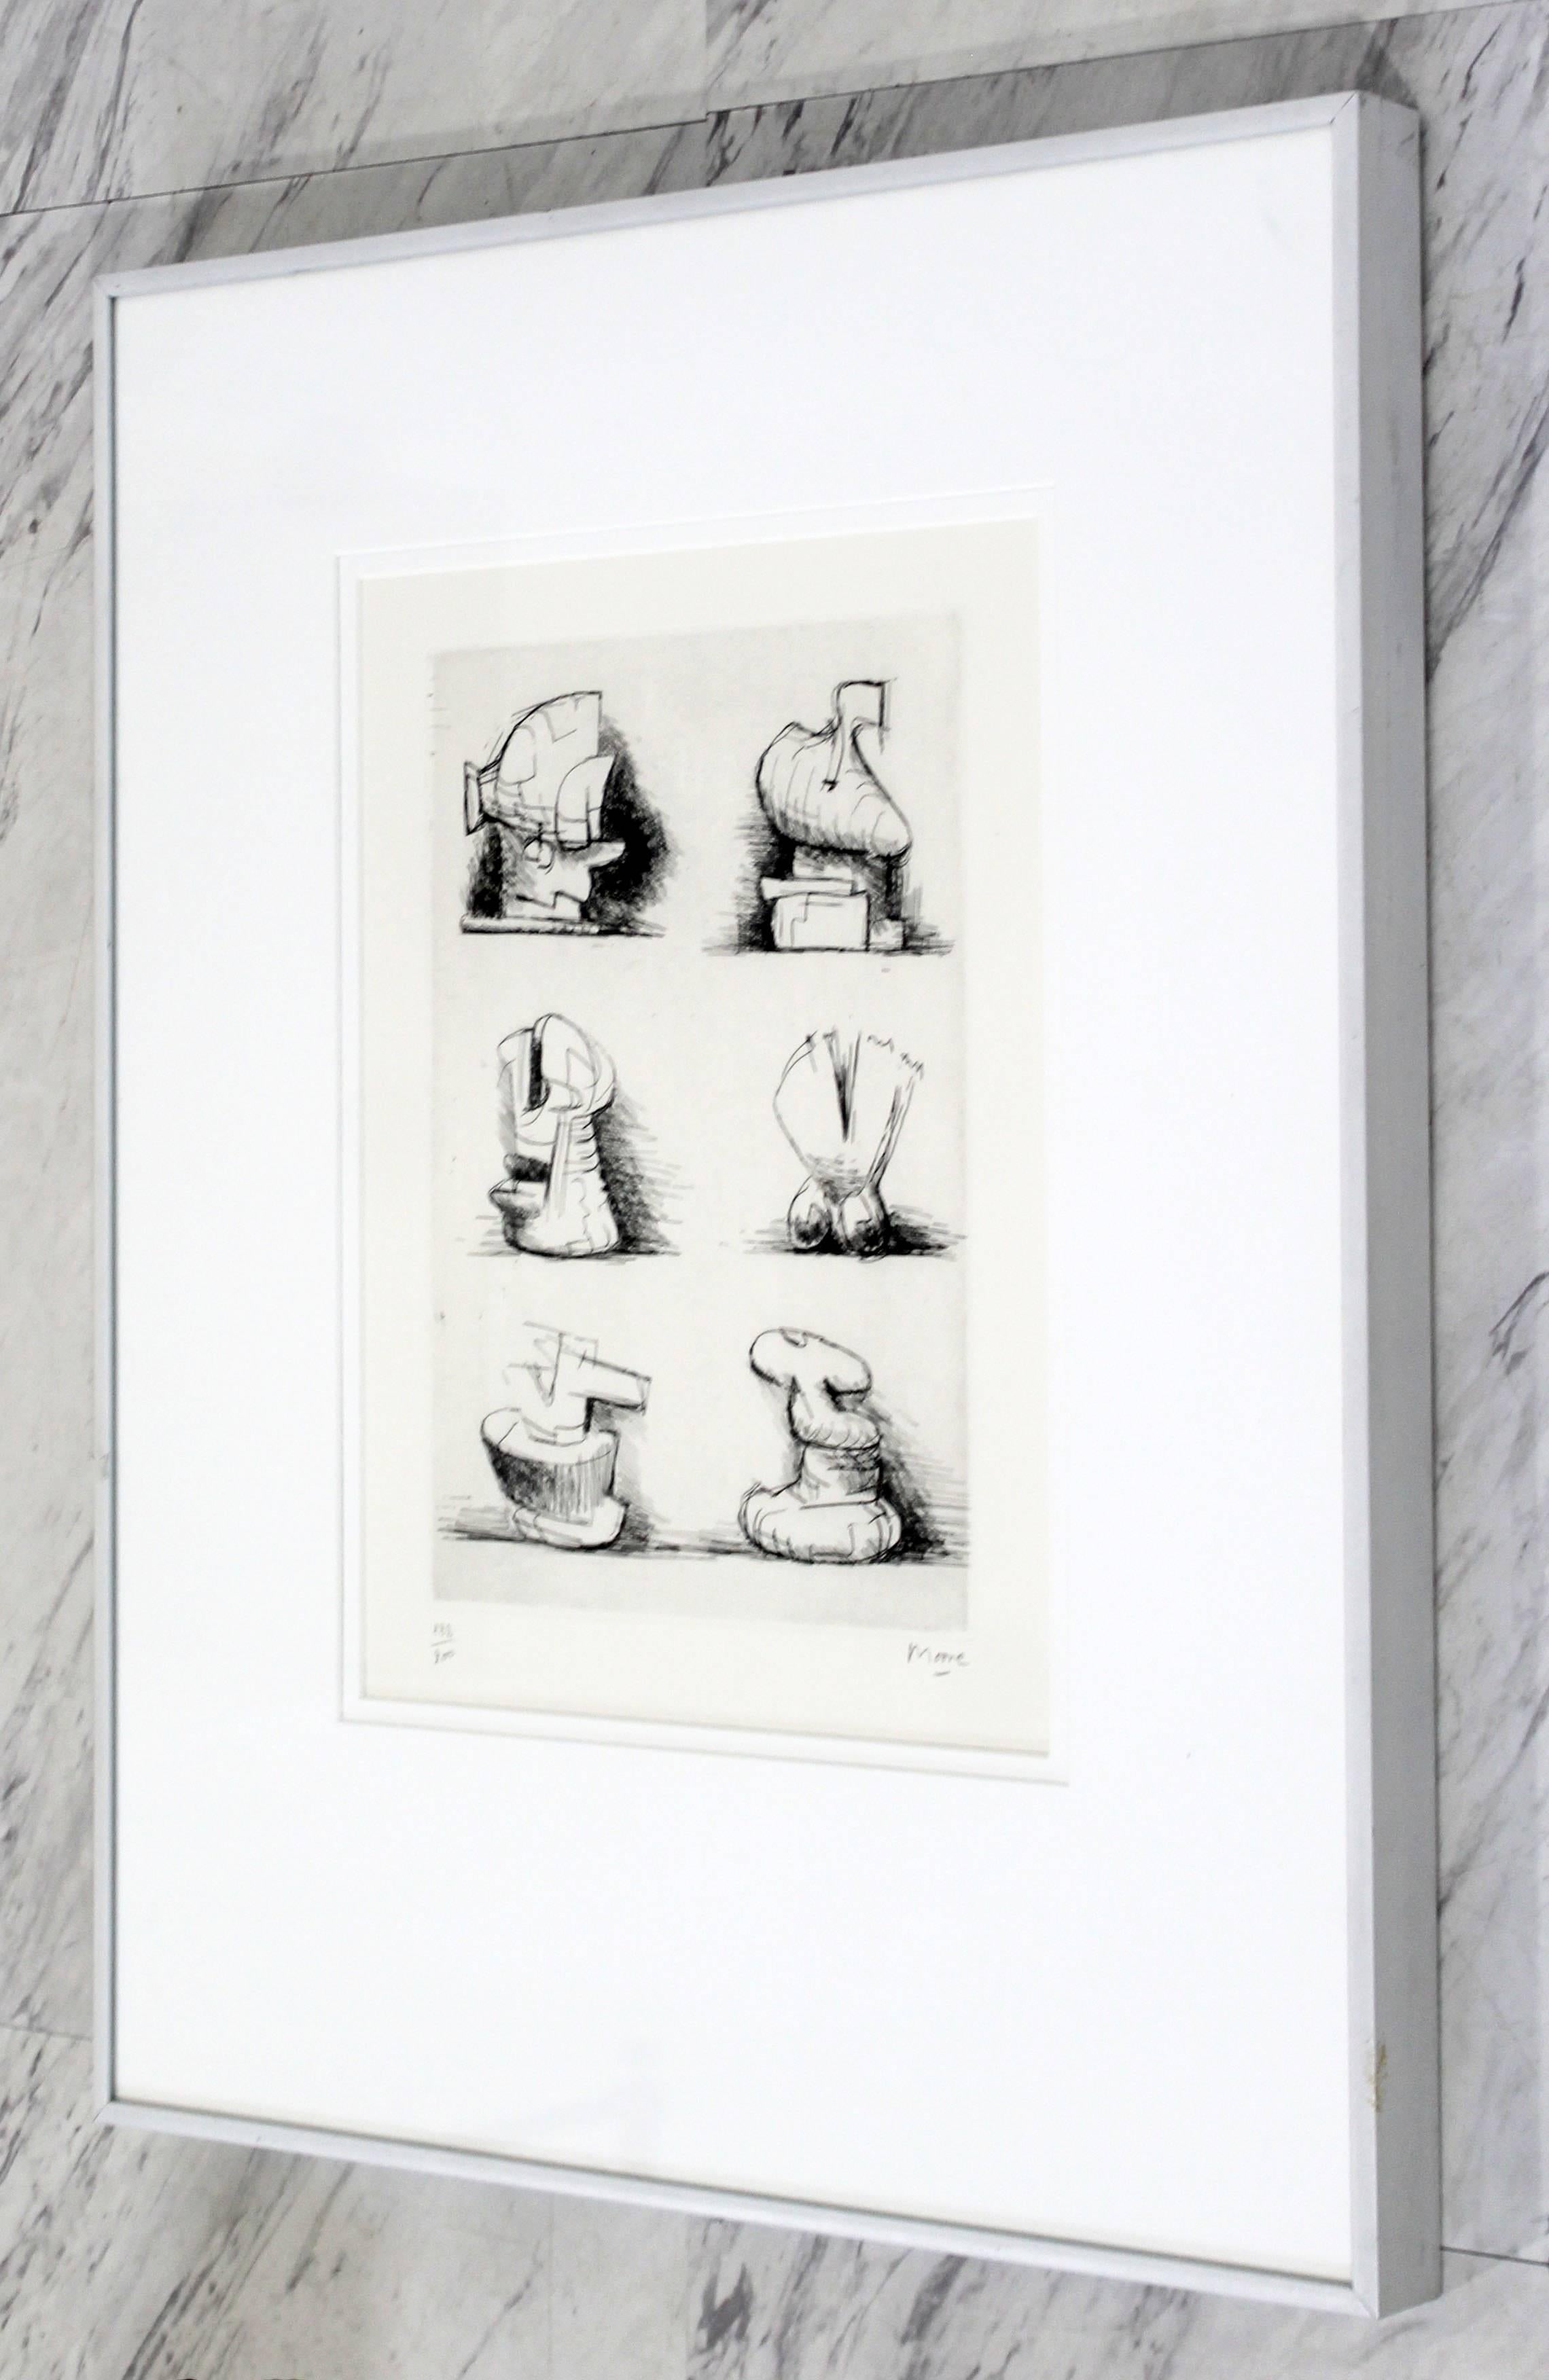 For your consideration is a stunning, framed print Six Sculptures Motive by Henry Moore, signed and numbered 182/200. In excellent condition. The dimensions of the frame are 18